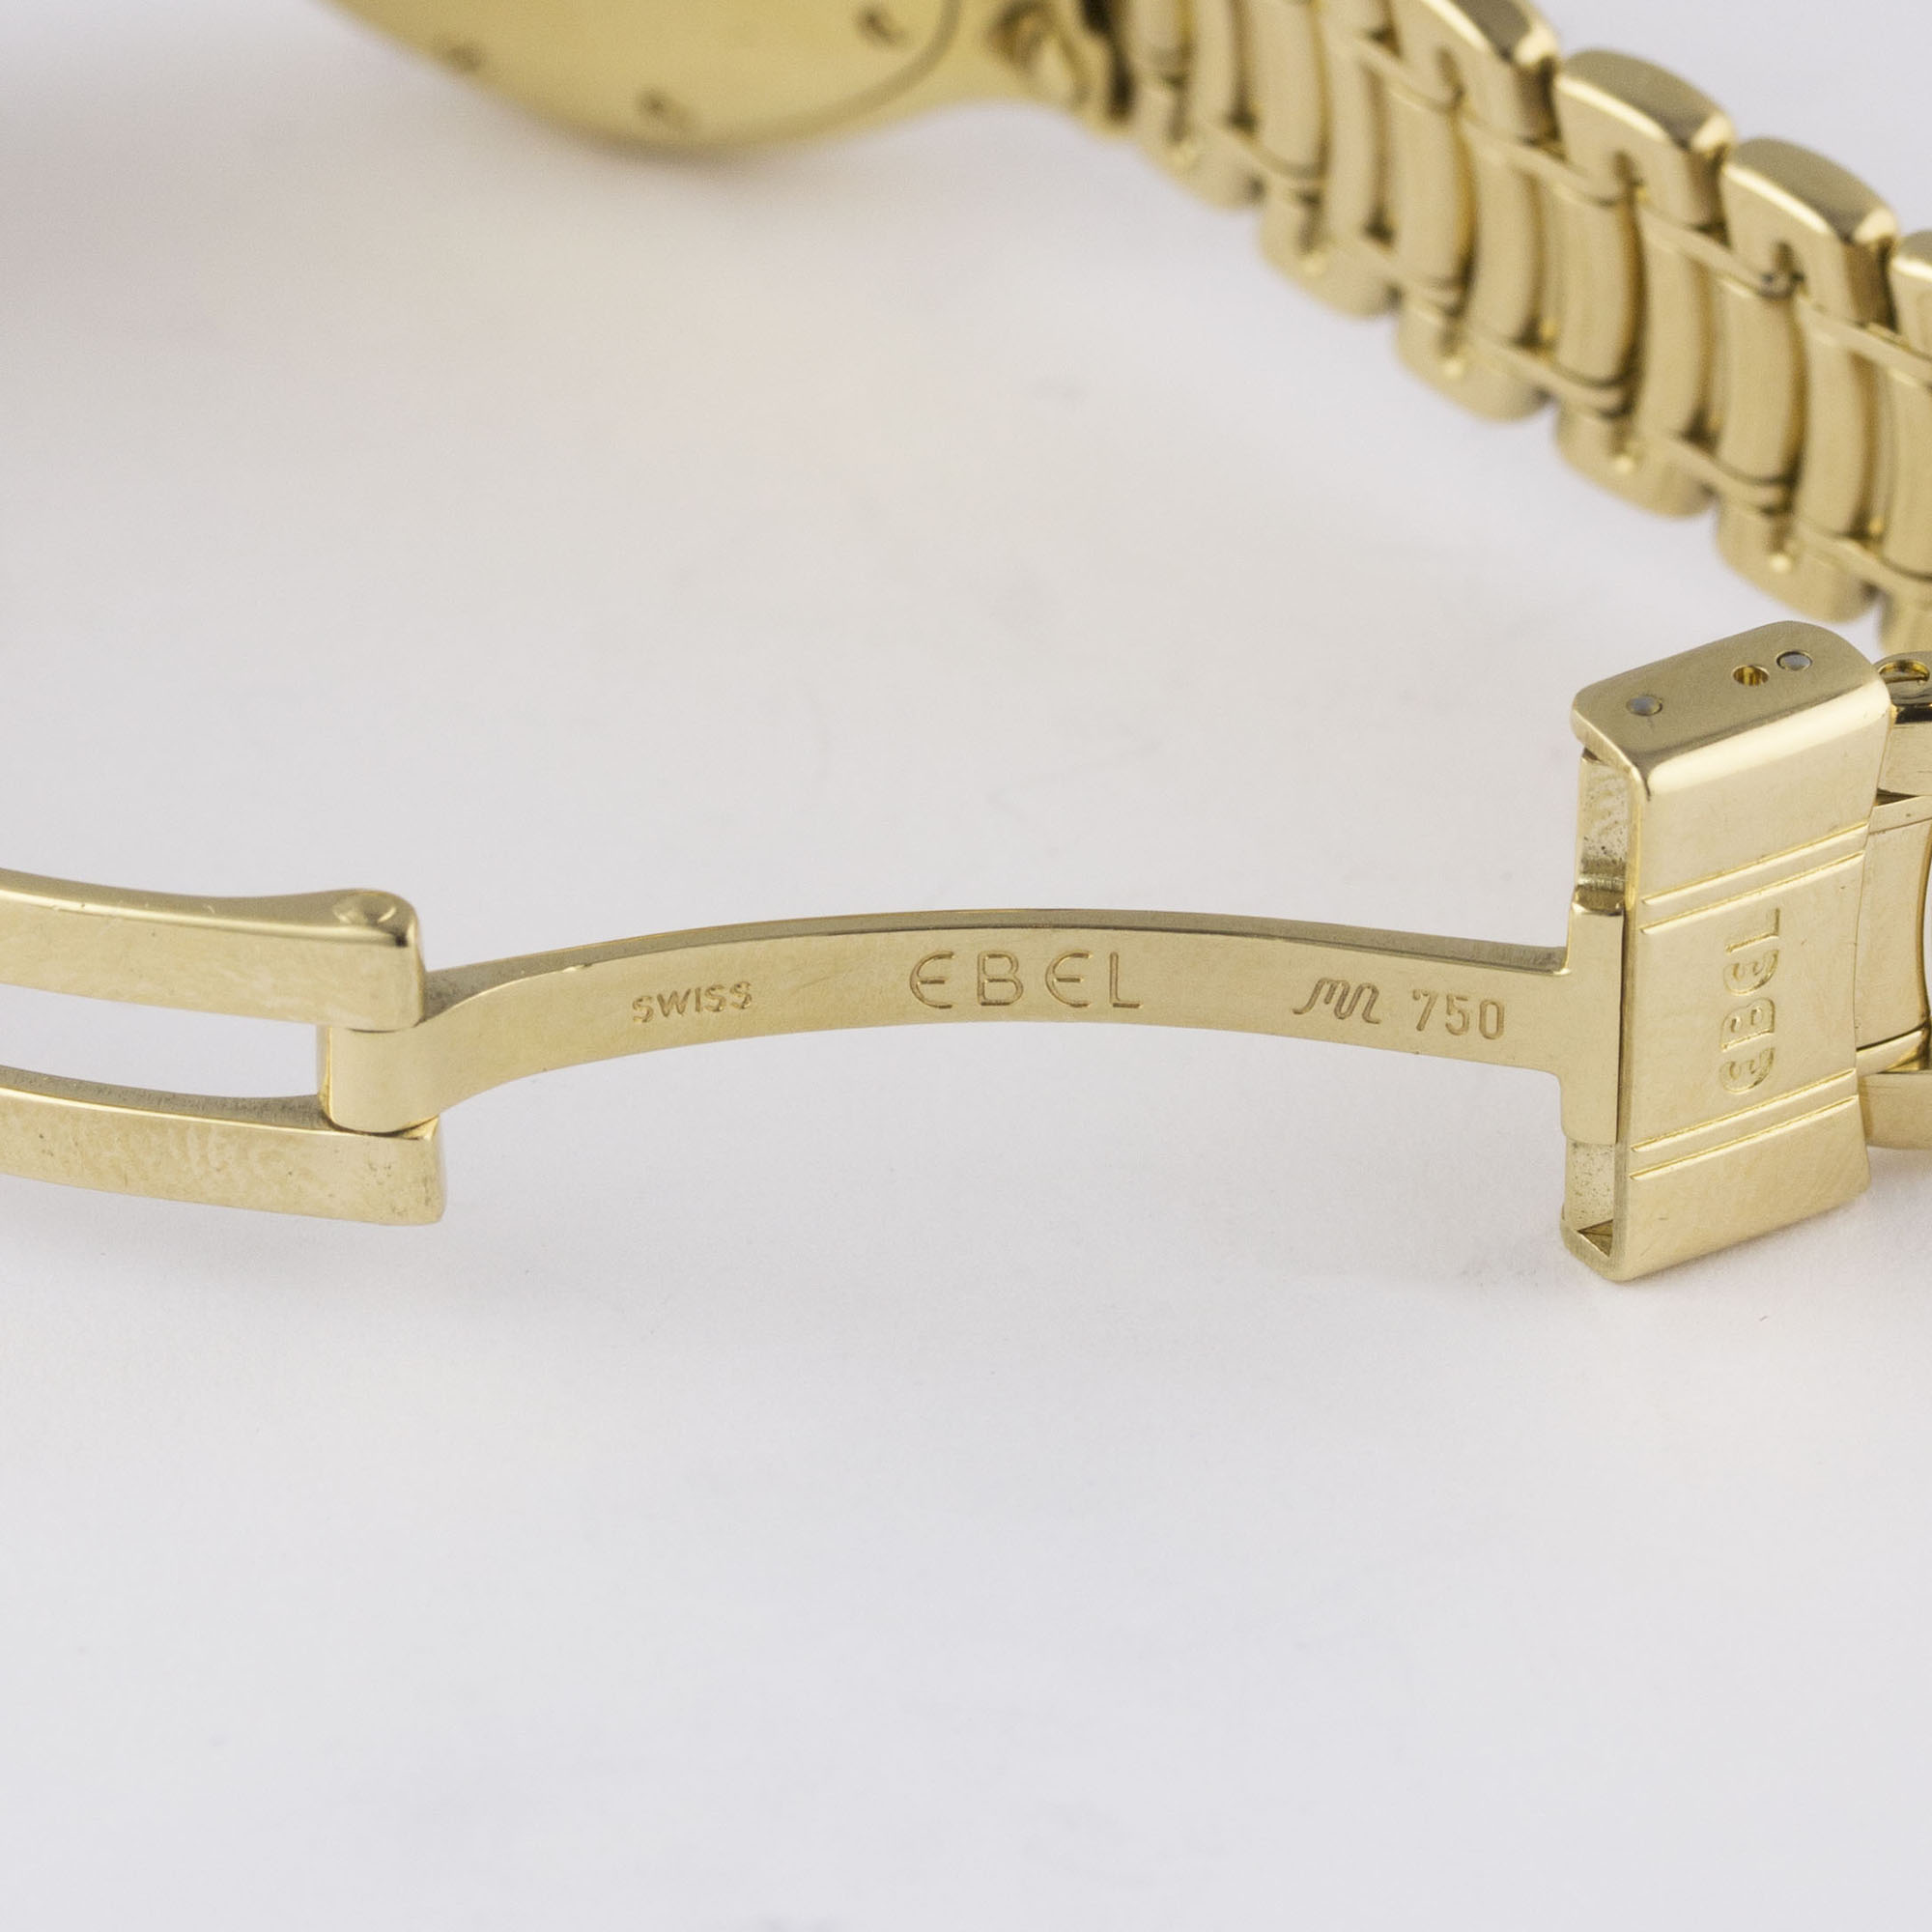 A LADIES 18K SOLID GOLD & DIAMOND EBEL 1911 BRACELET WATCH CIRCA 2000s, REF. E8090224 WITH - Image 7 of 8